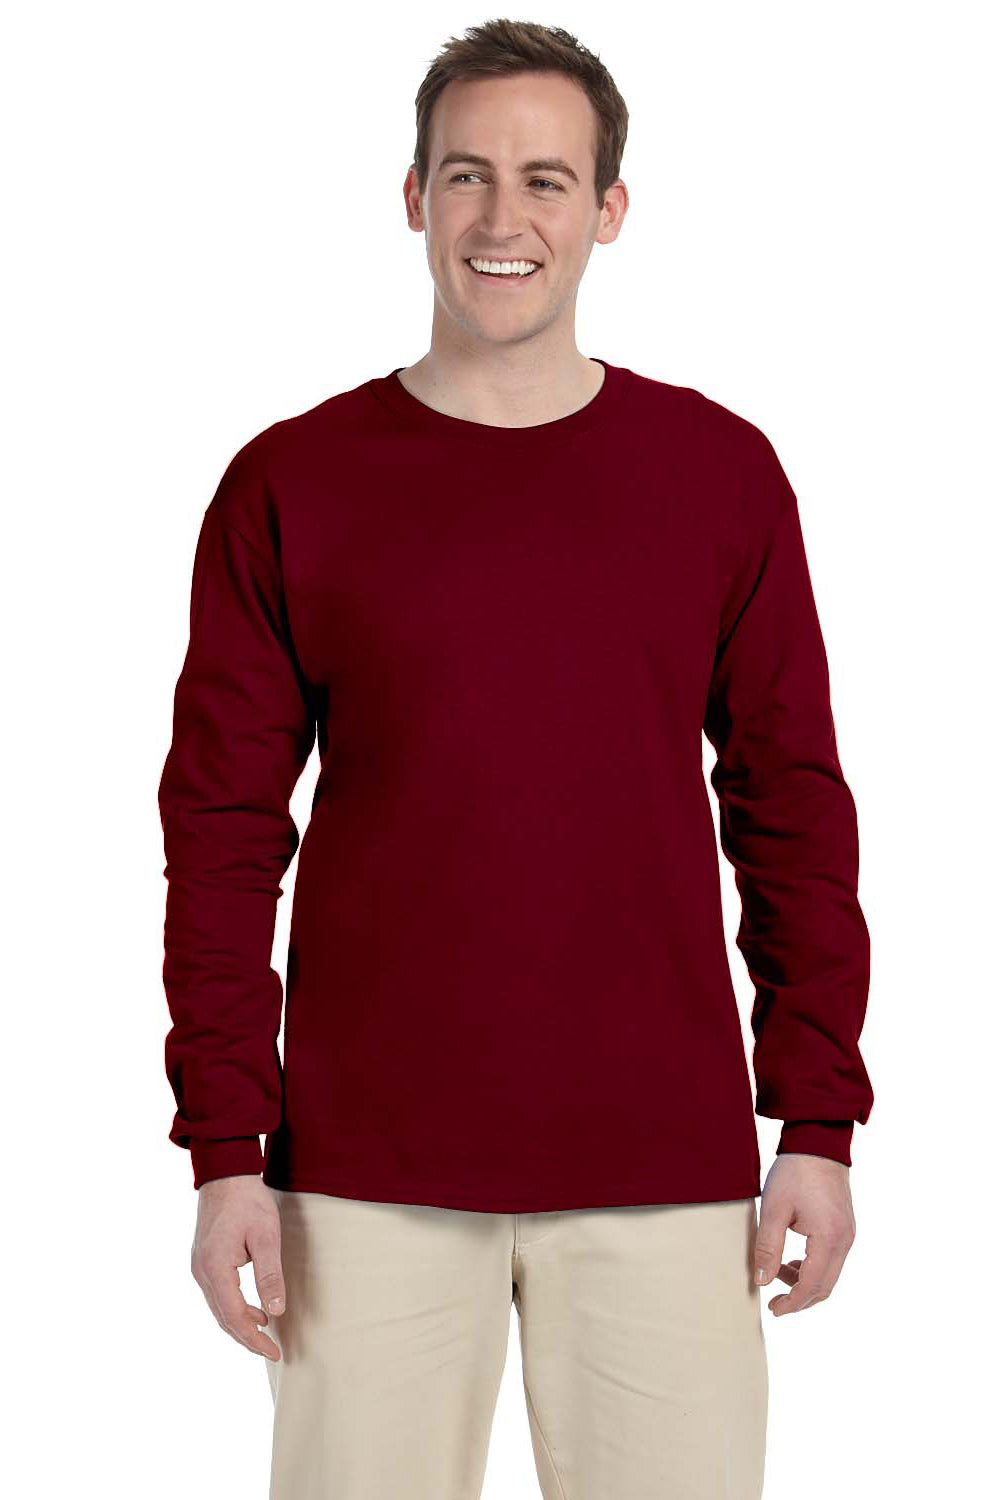 Fruit Of The Loom 4930 Mens HD Jersey Long Sleeve Crewneck T-Shirt Maroon Front